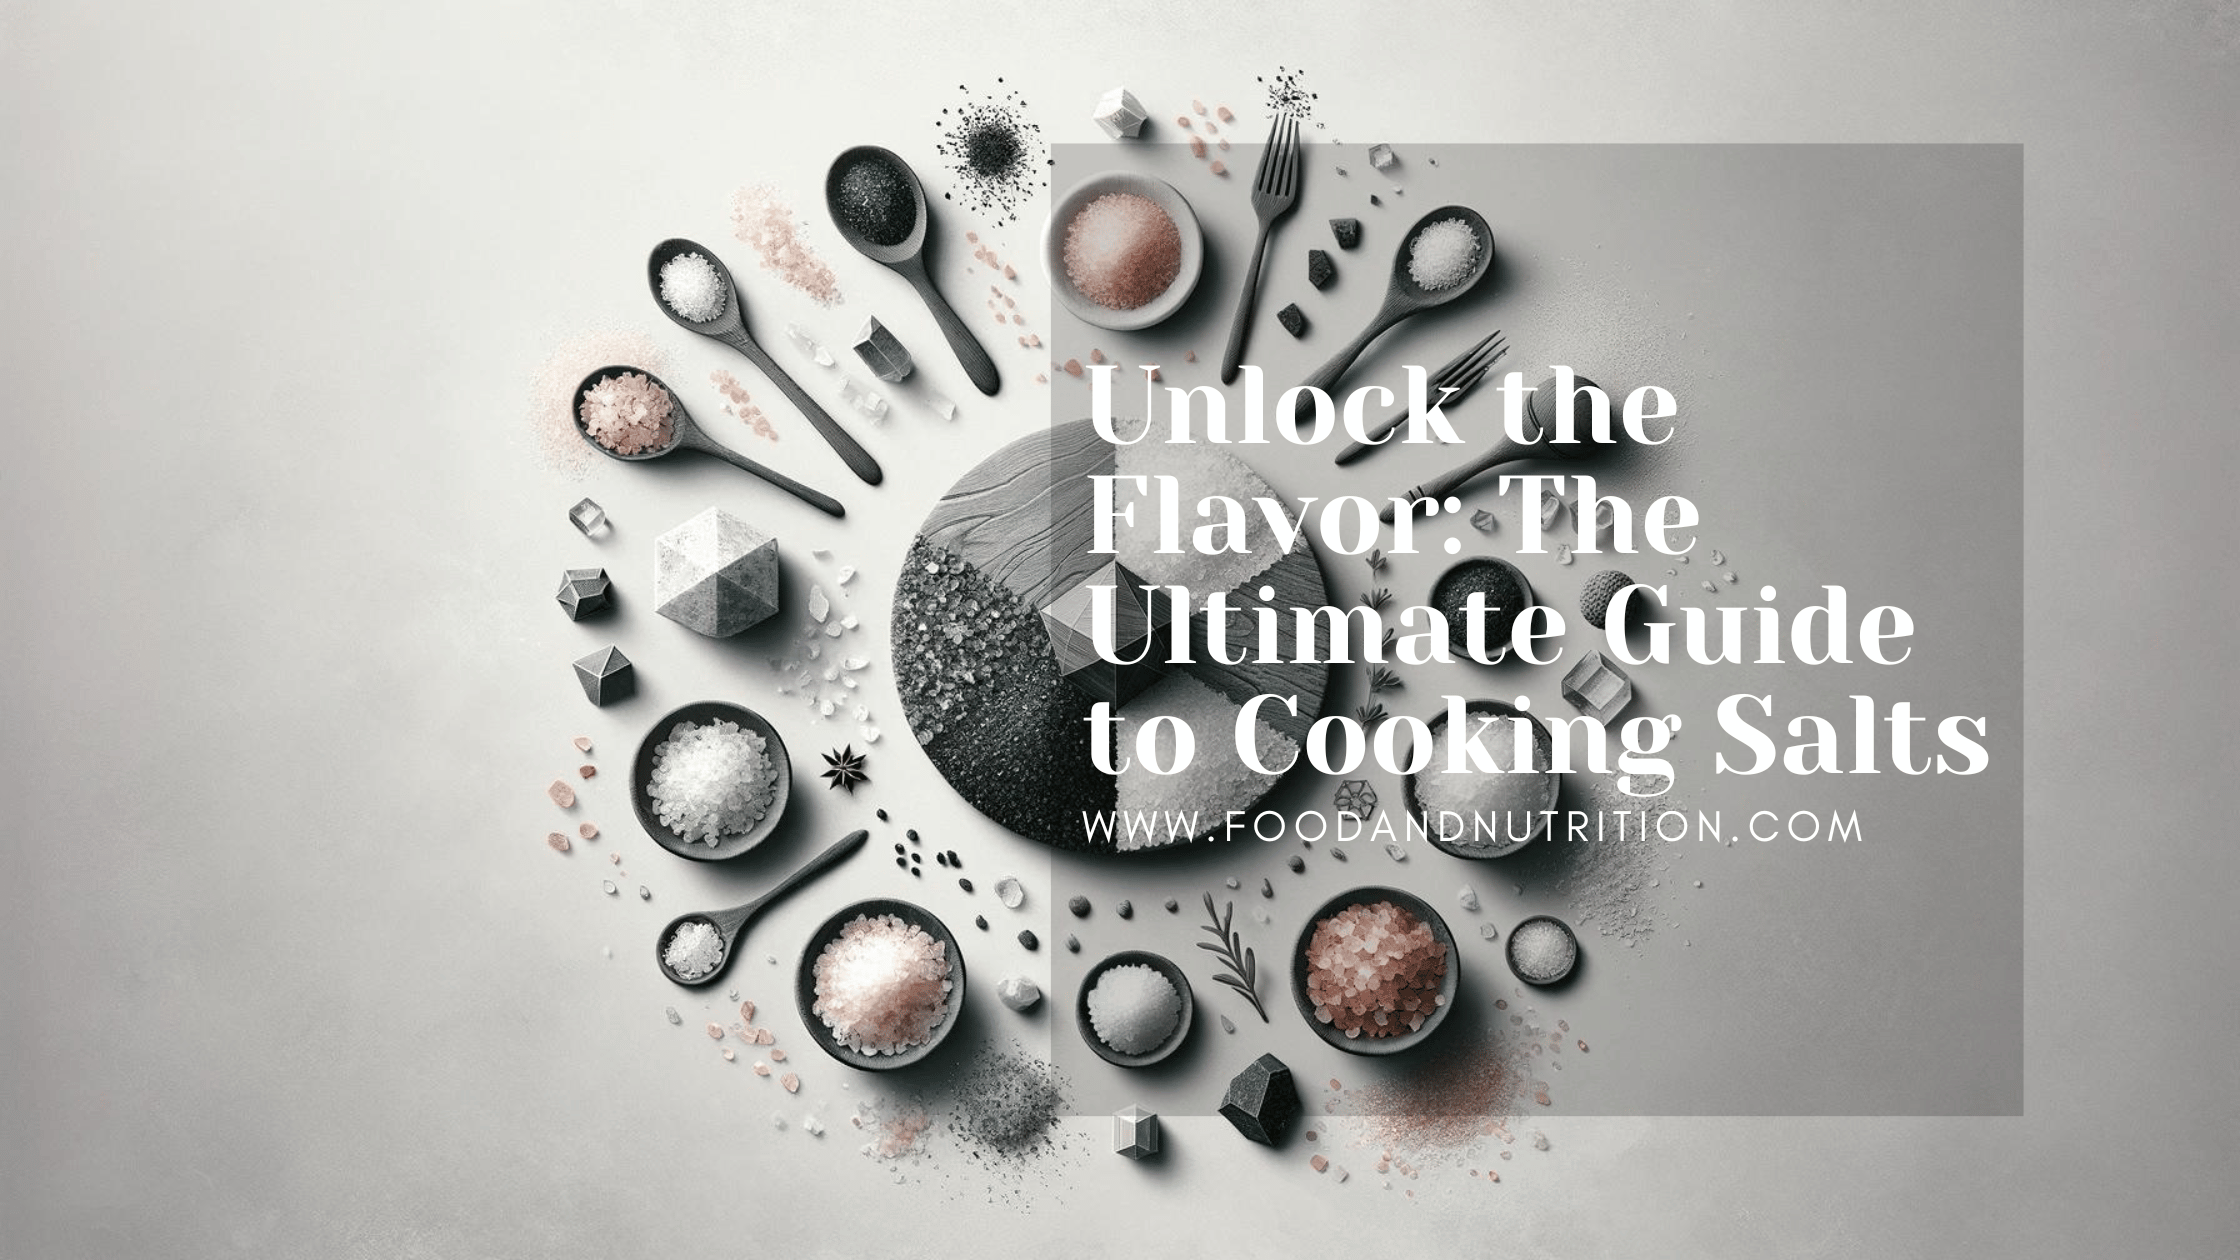 Unlock the Flavor: The Ultimate Guide to Cooking Salts